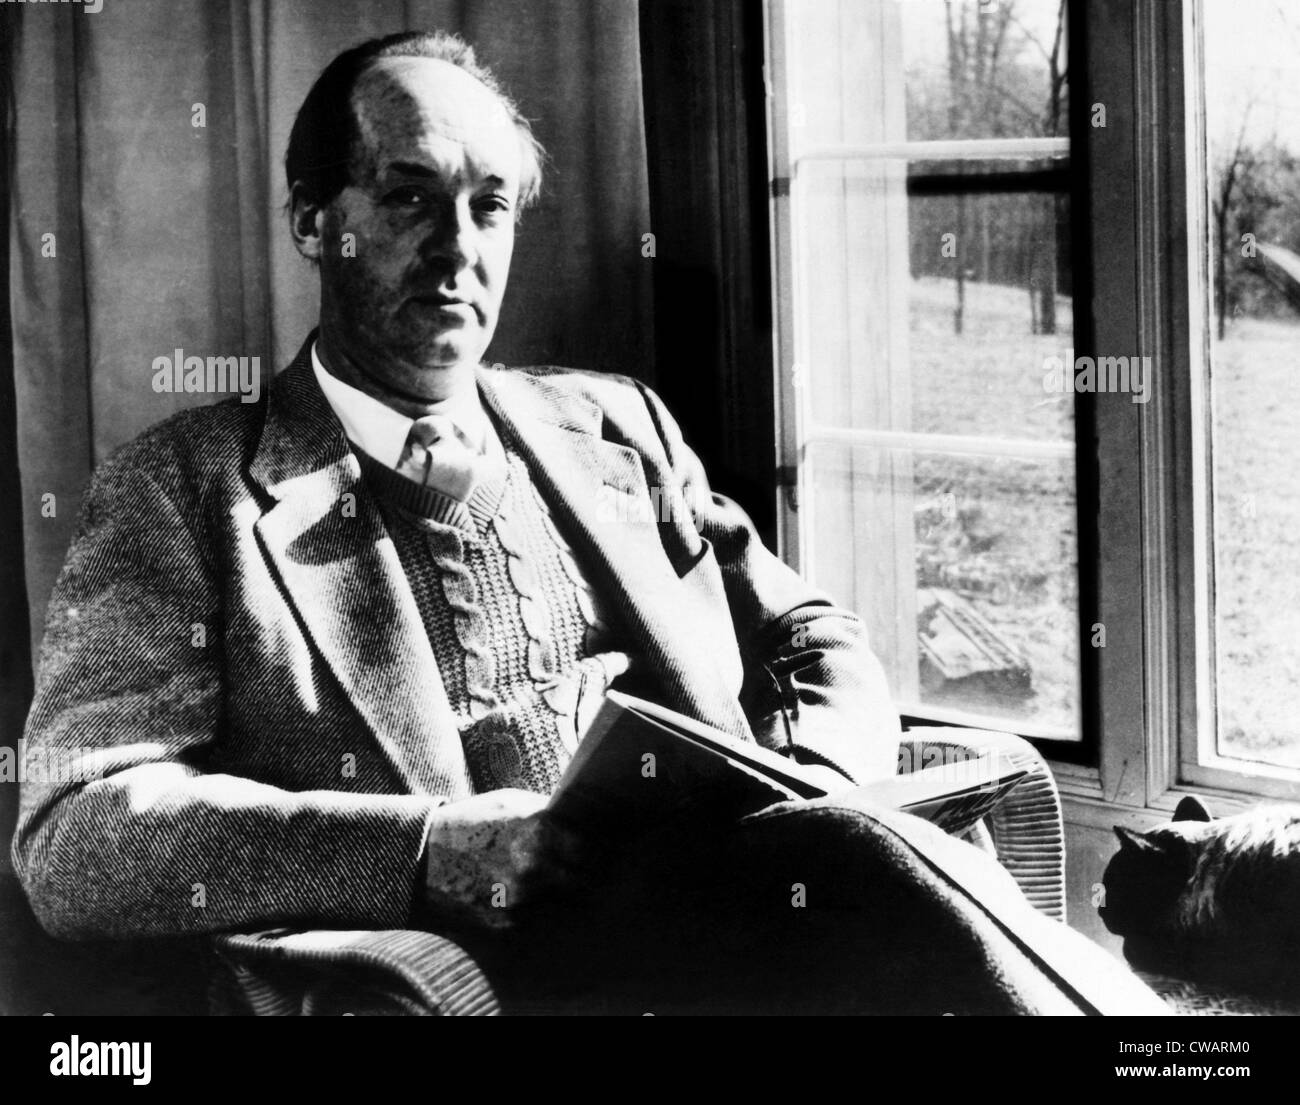 Russian-American author and novelist Vladimir Nabokov, (1899-1977), c. 1964.. Courtesy: CSU Archives / Everett Collection Stock Photo